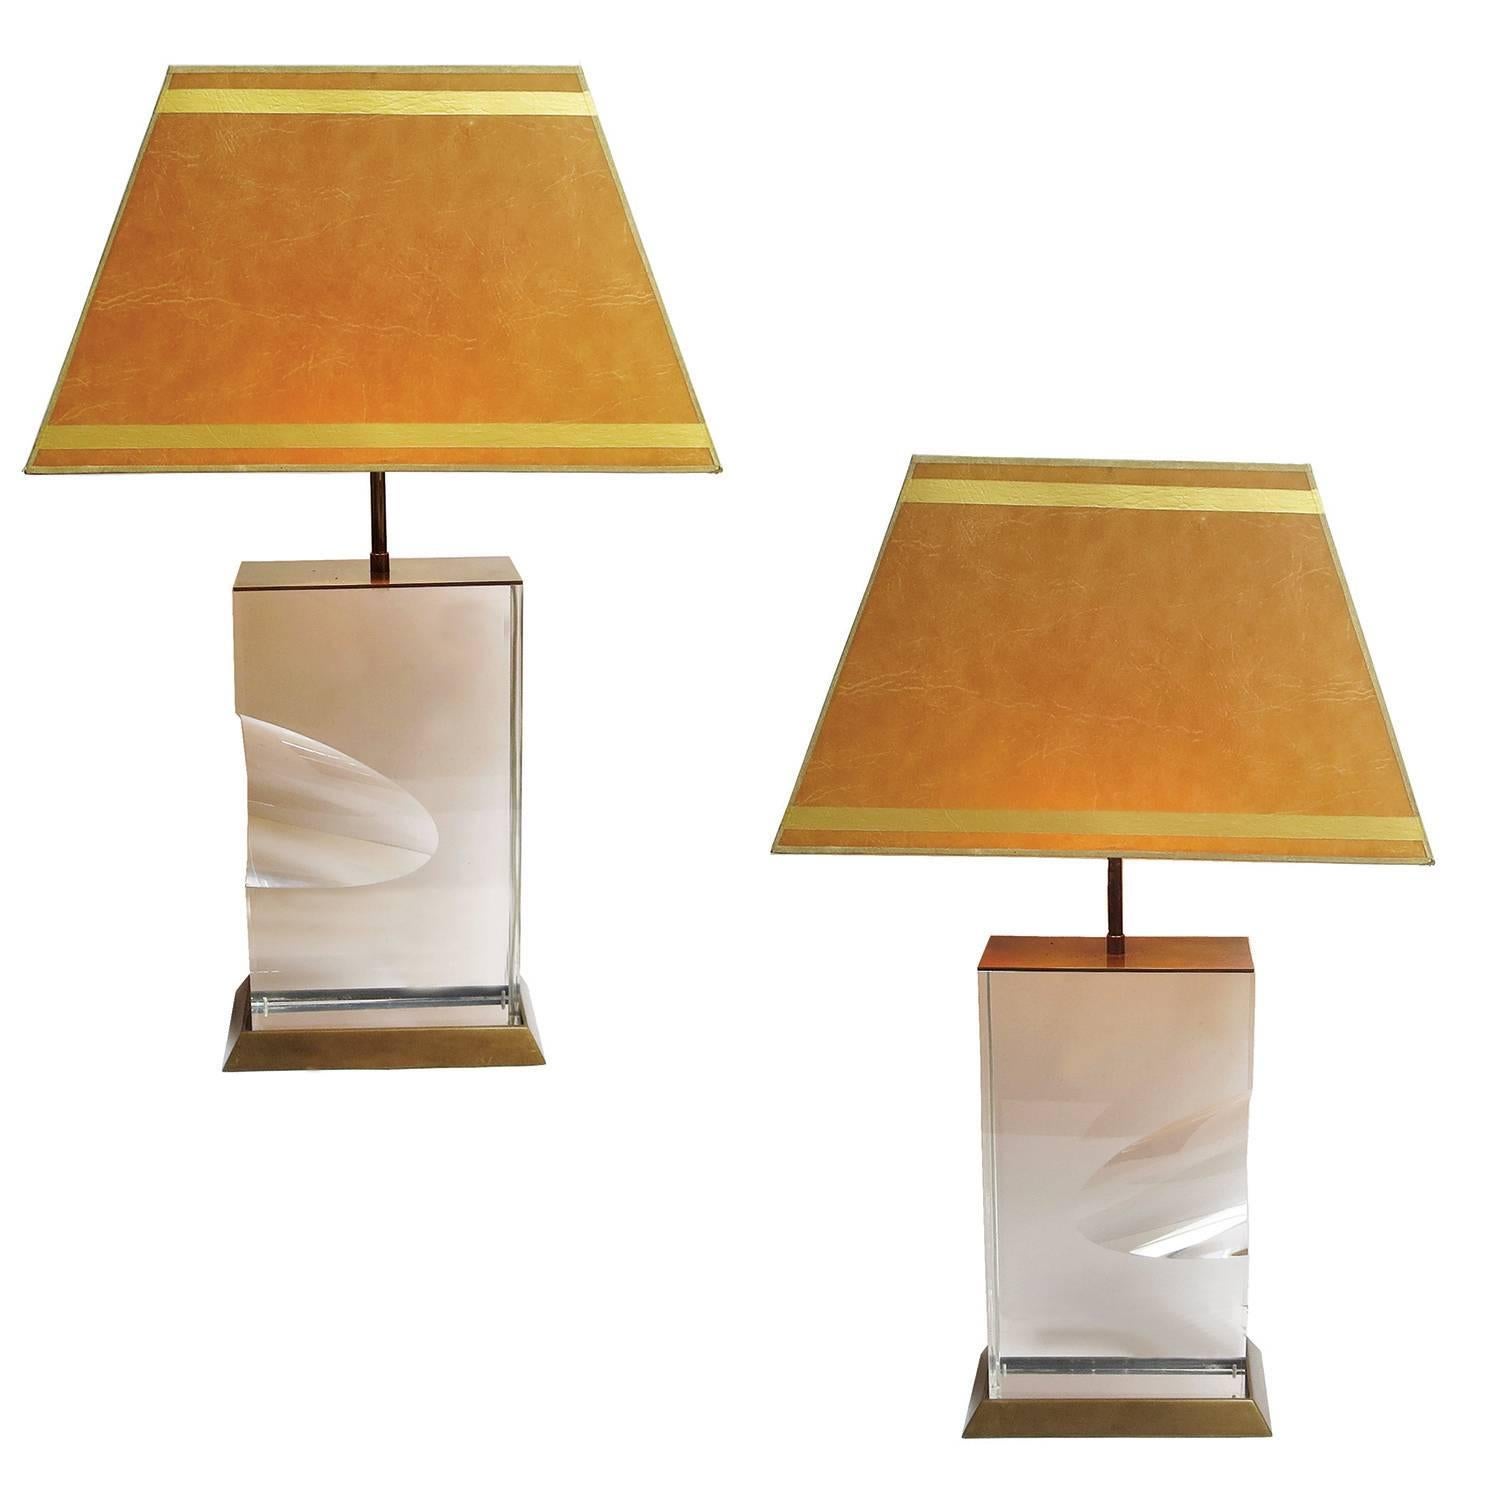 This amazing pair are by the acrylic master Jeffrey Bigelow, signed and dated 1991. Both lamps are solid blocks of polished acrylic Lucite. There is a striking design element of a 